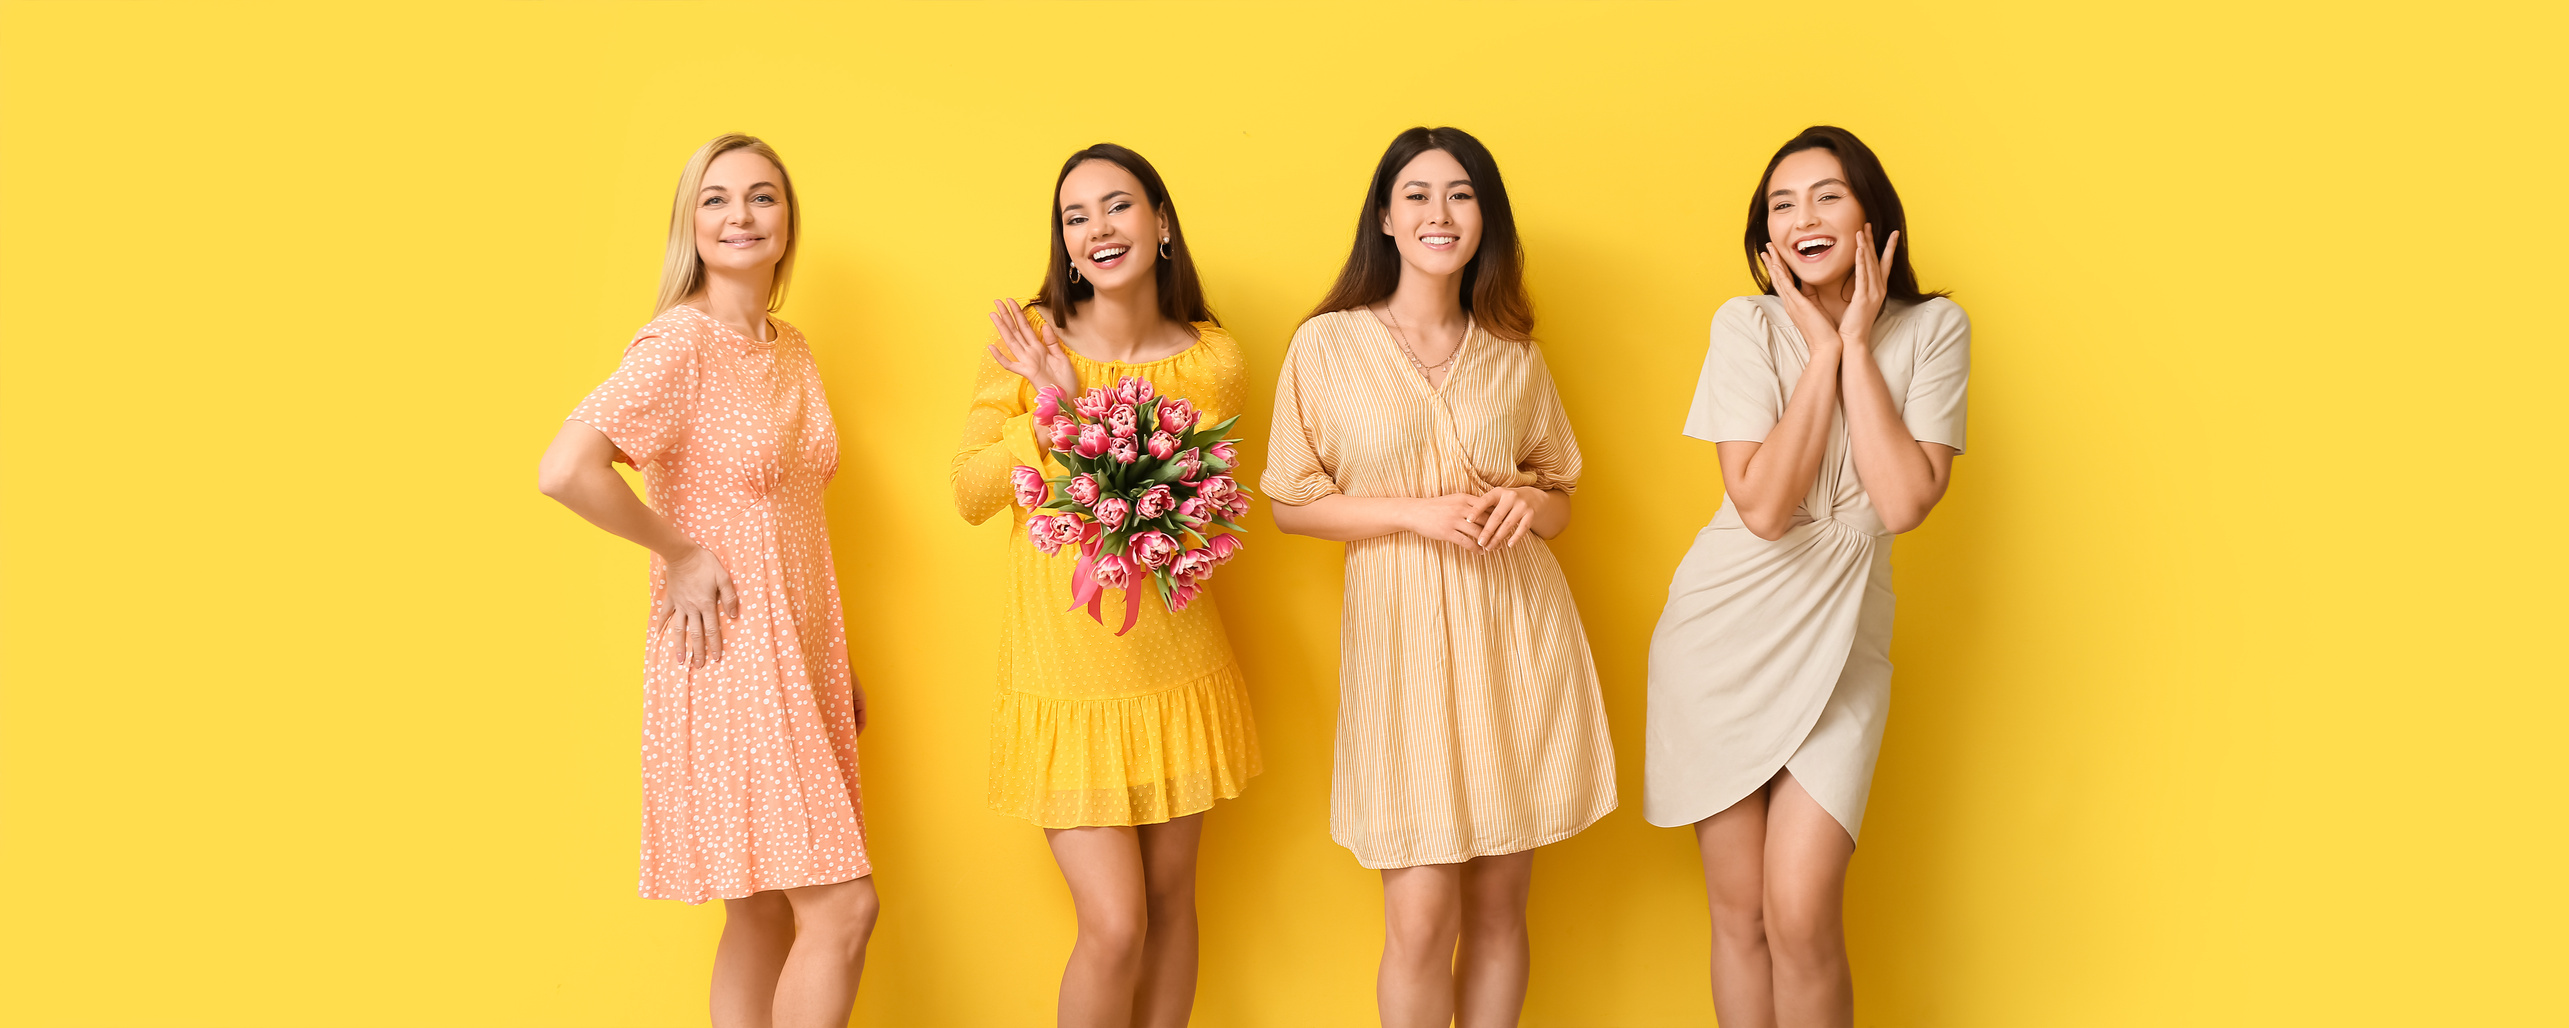 Beautiful Women with Bouquet of Flowers on Yellow Background. International Women's Day